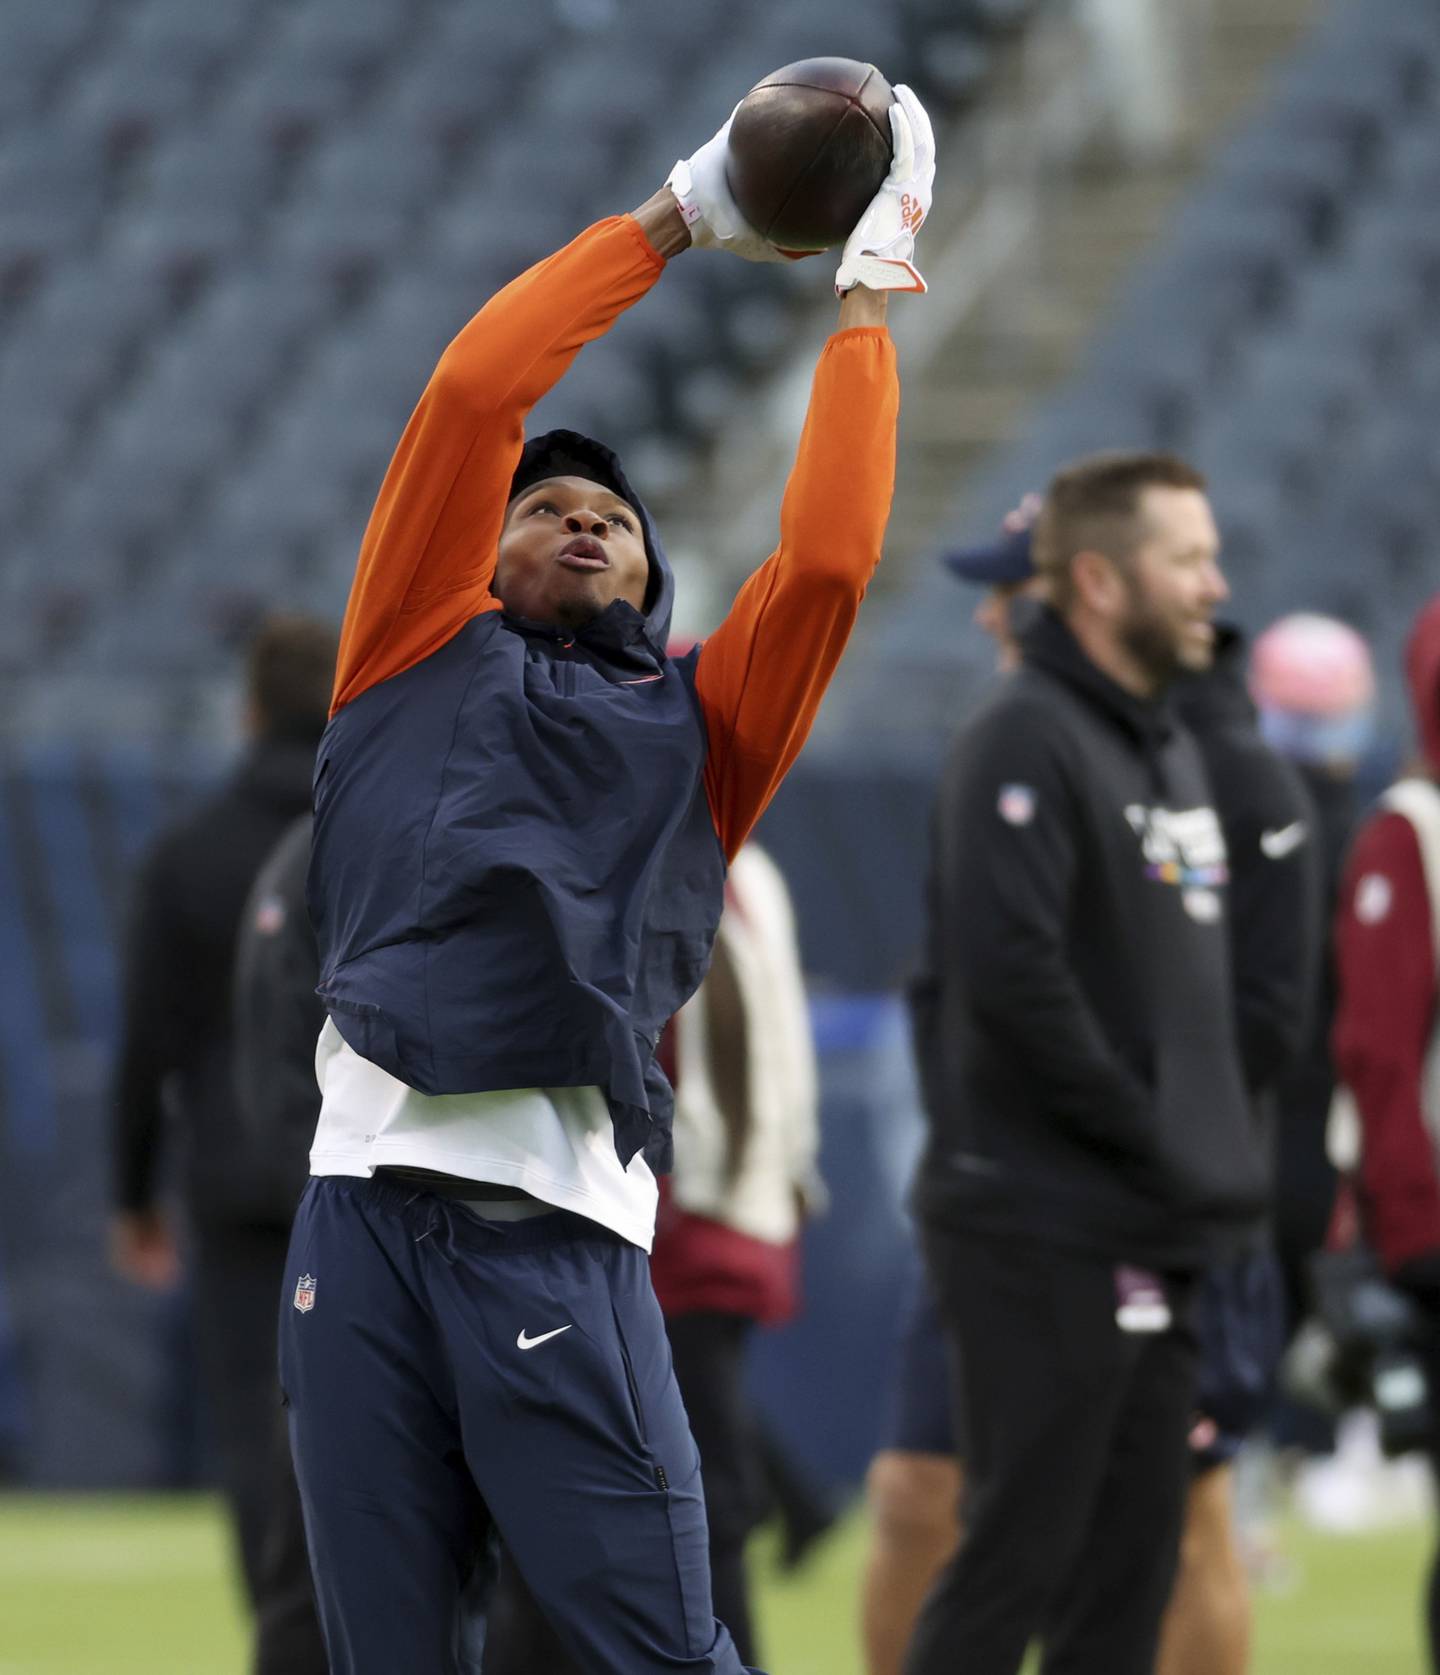 Bears wide receiver Darnell Mooney warms up for a game against the Commanders at Soldier Field on Oct. 13, 2022.